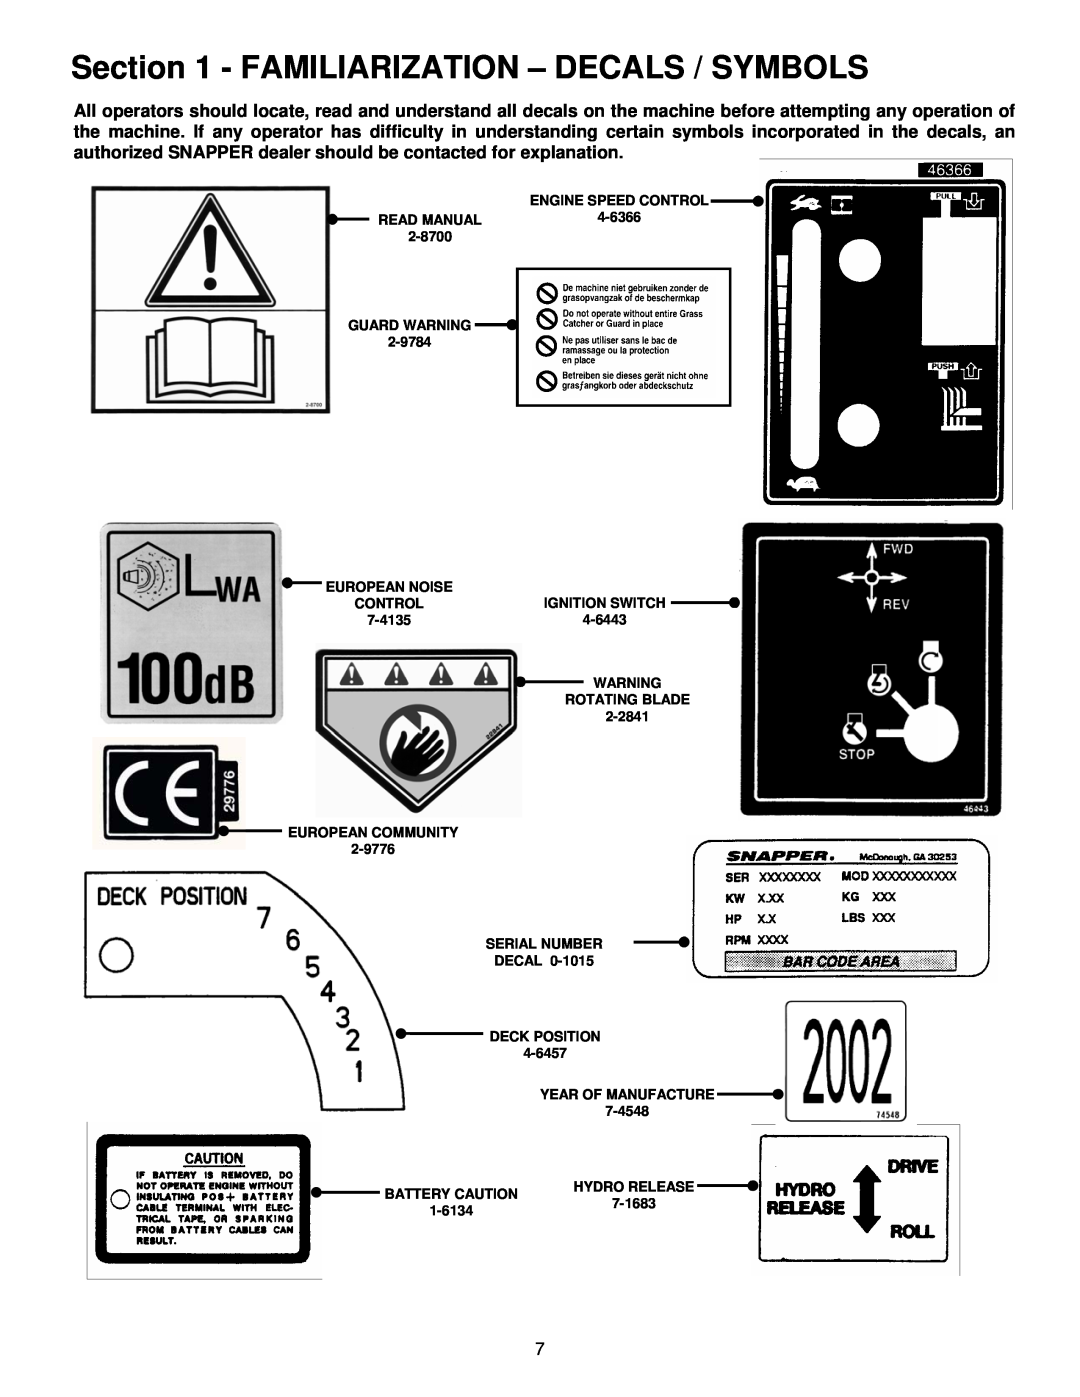 Snapper EYZ16335BVE important safety instructions Familiarization - Decals / Symbols 